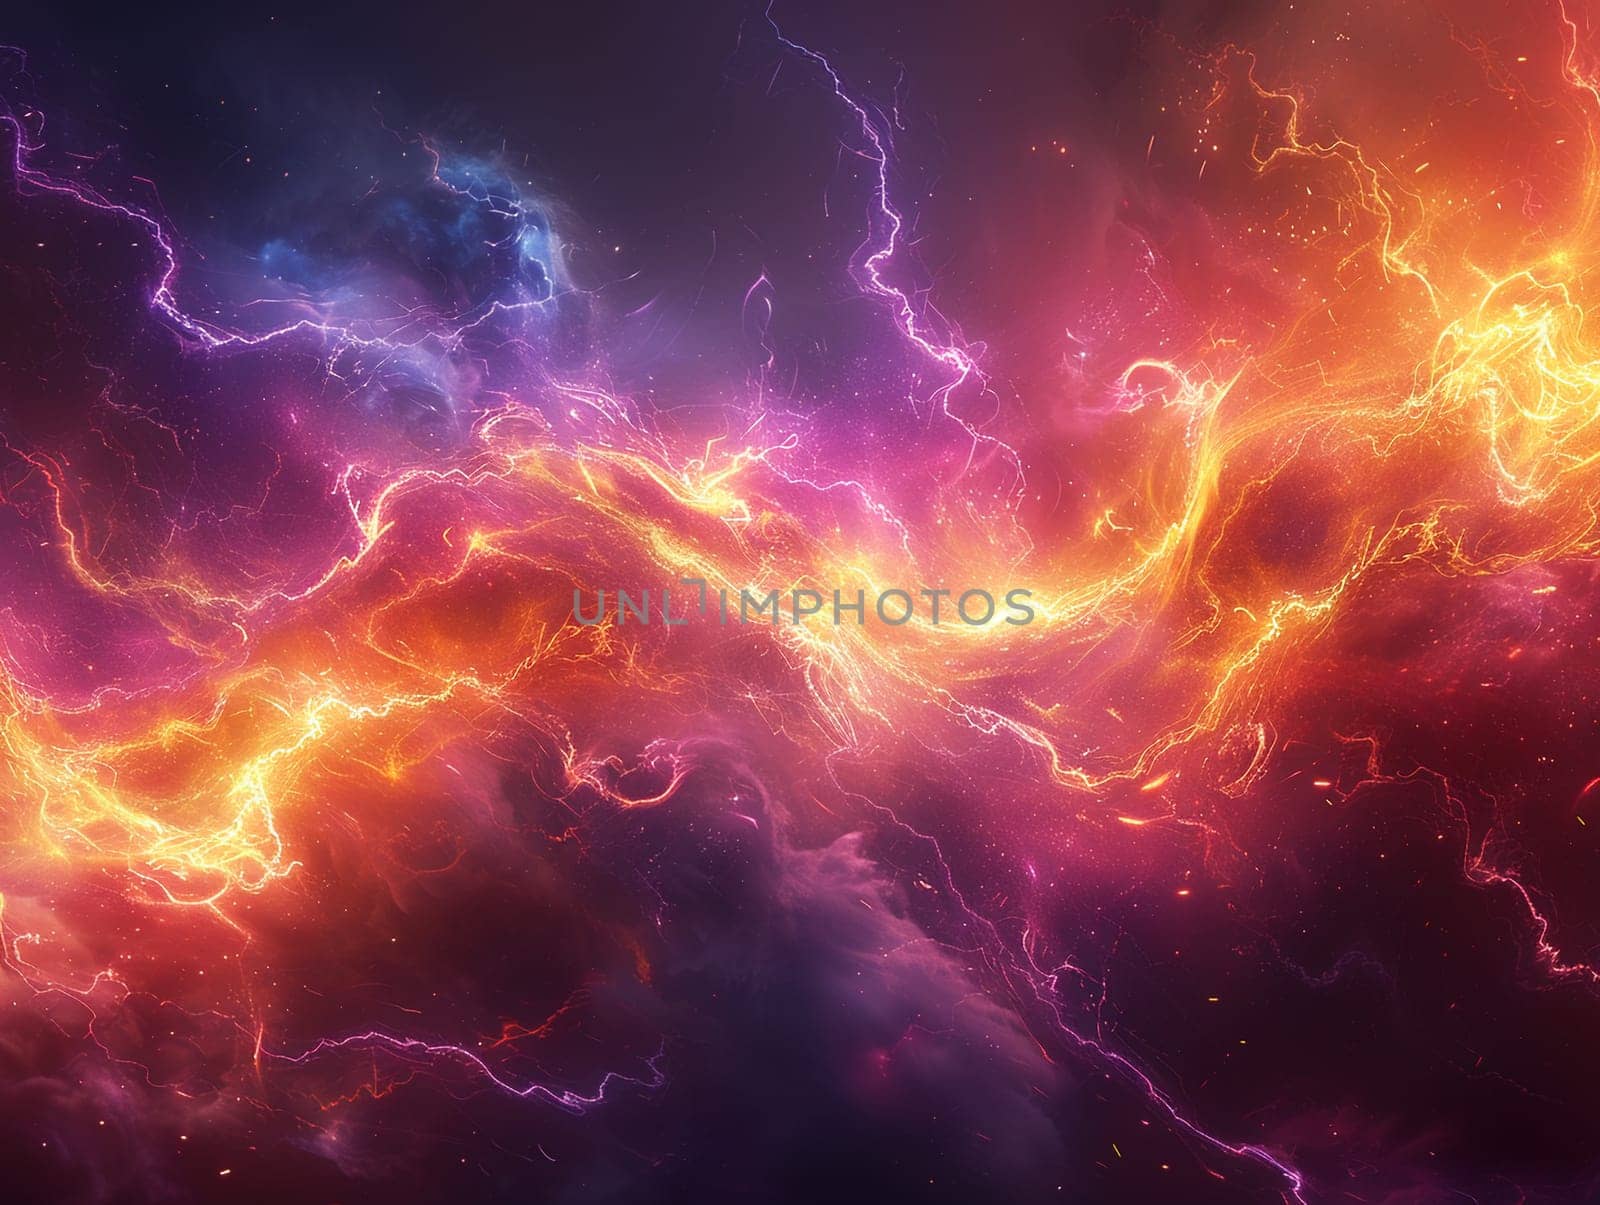 Electricity-themed abstract digital art by Benzoix